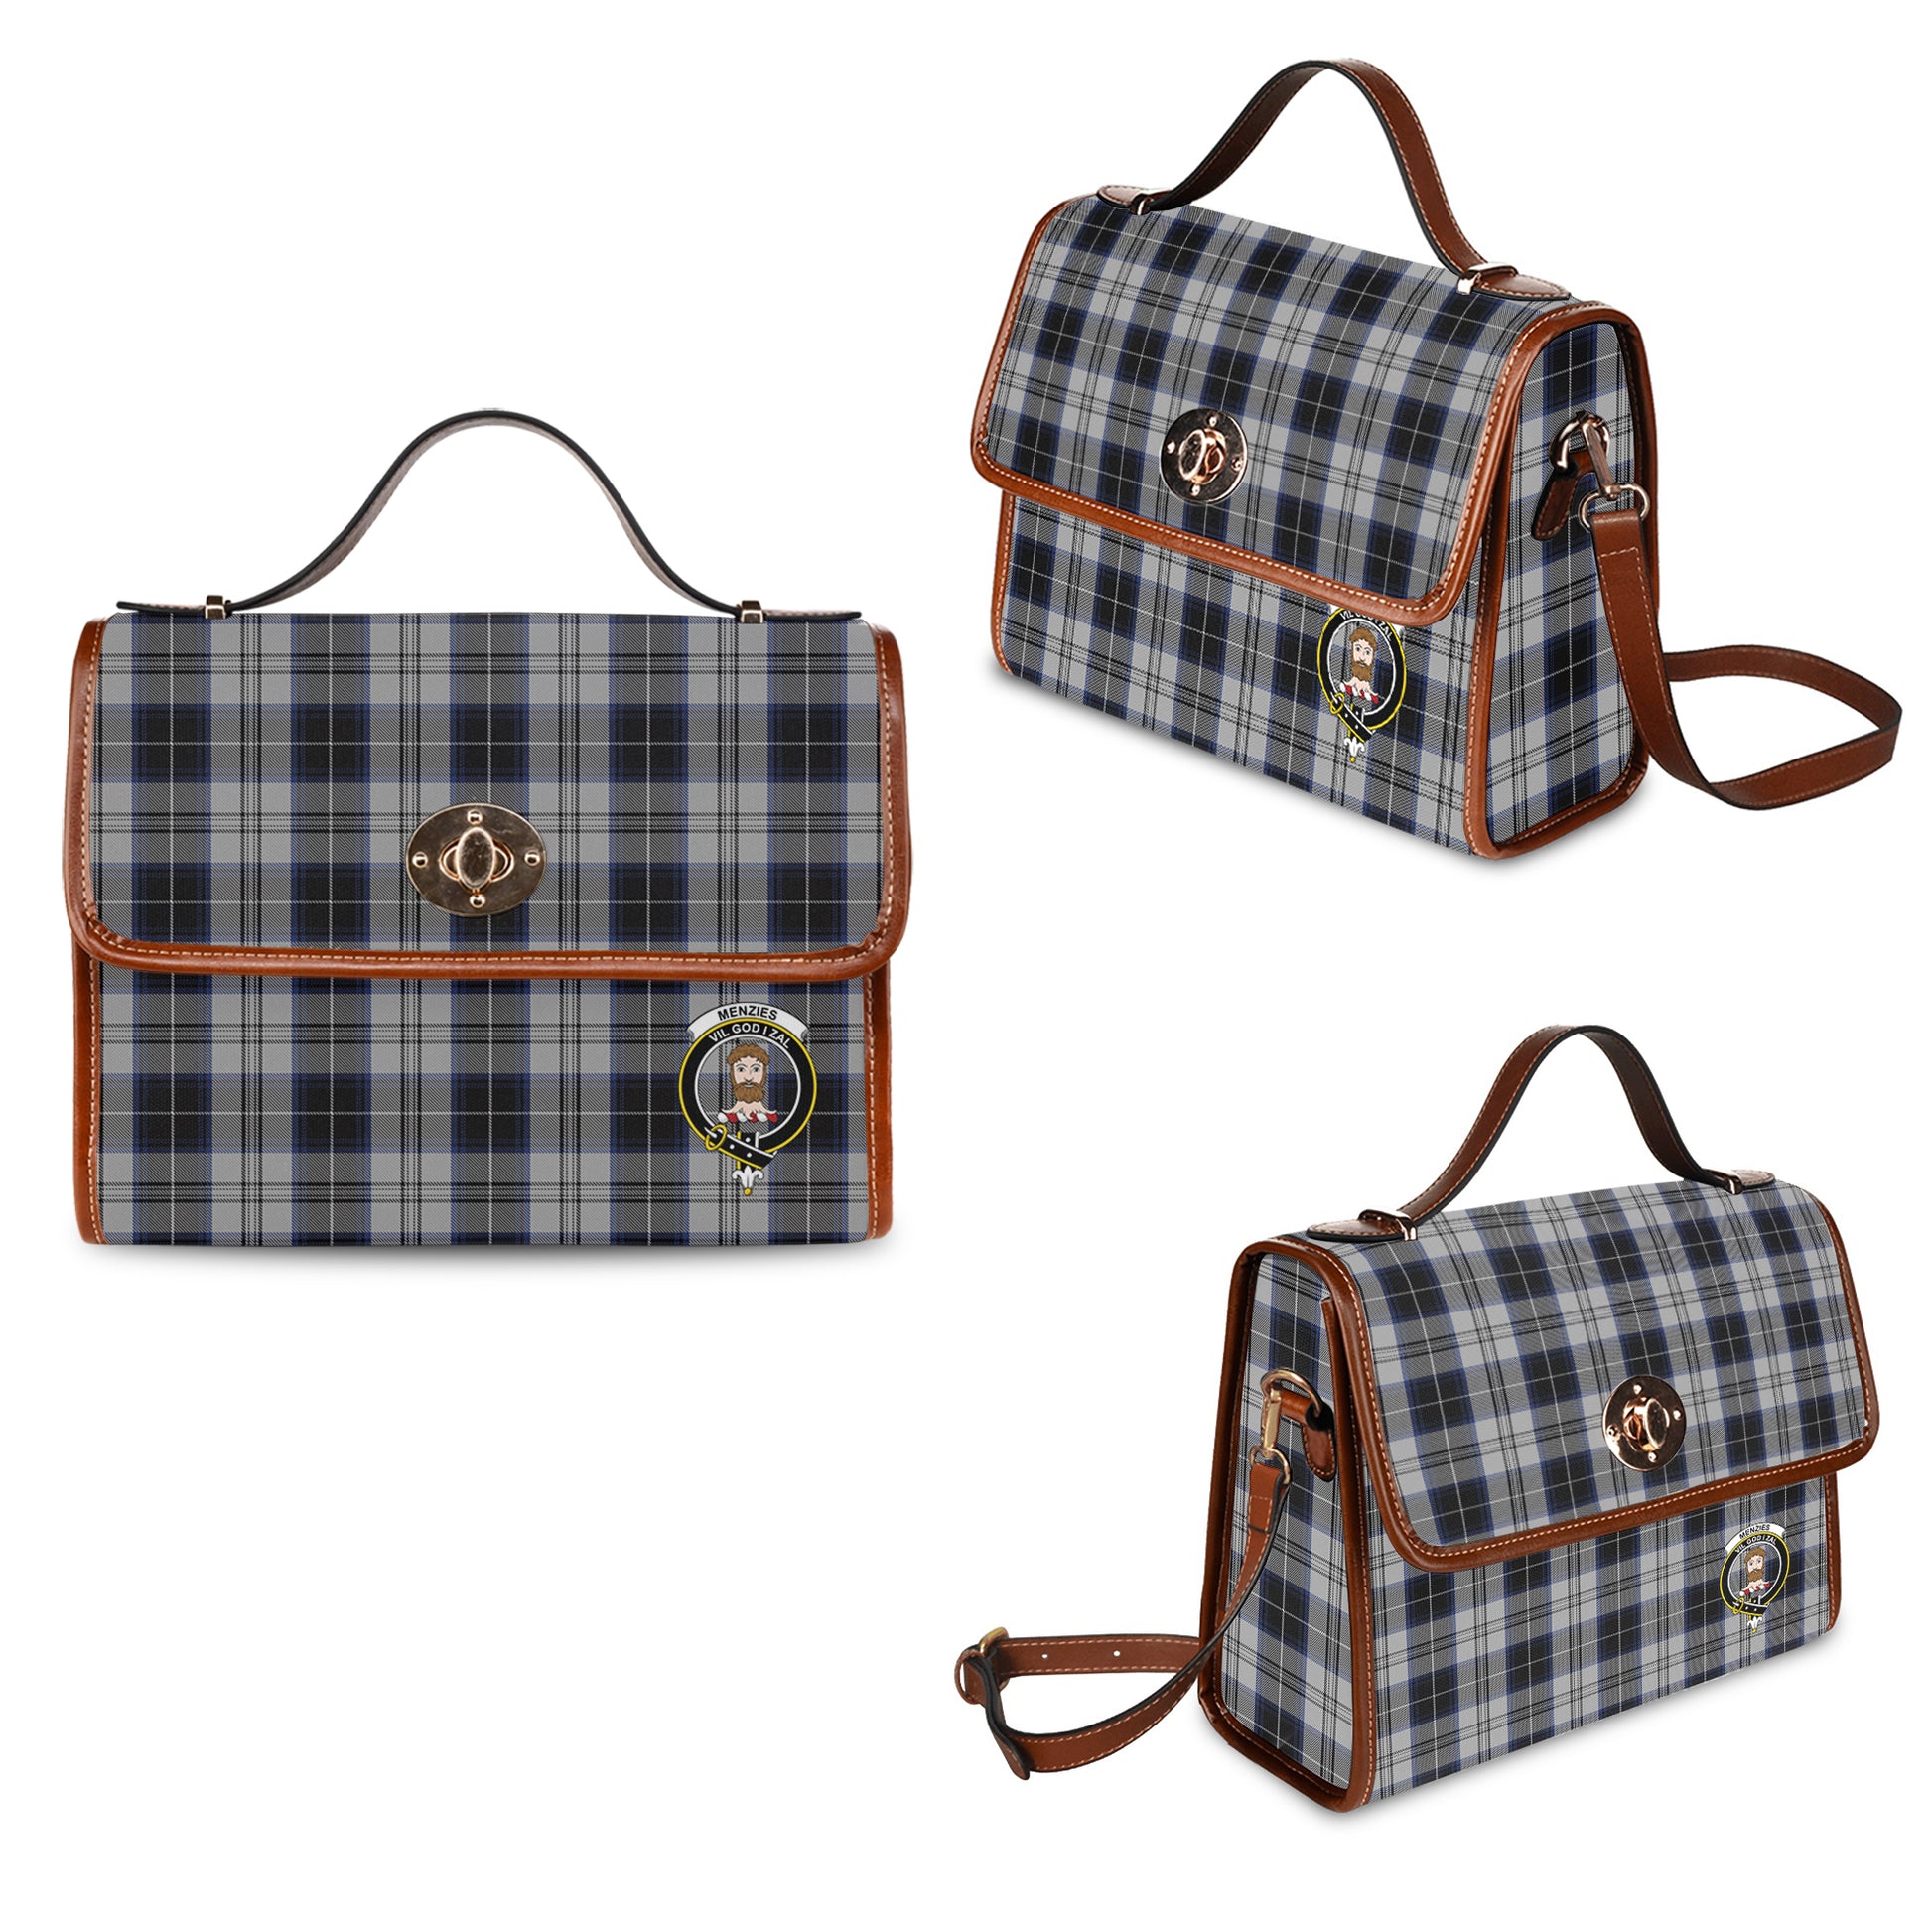 menzies-black-dress-tartan-leather-strap-waterproof-canvas-bag-with-family-crest